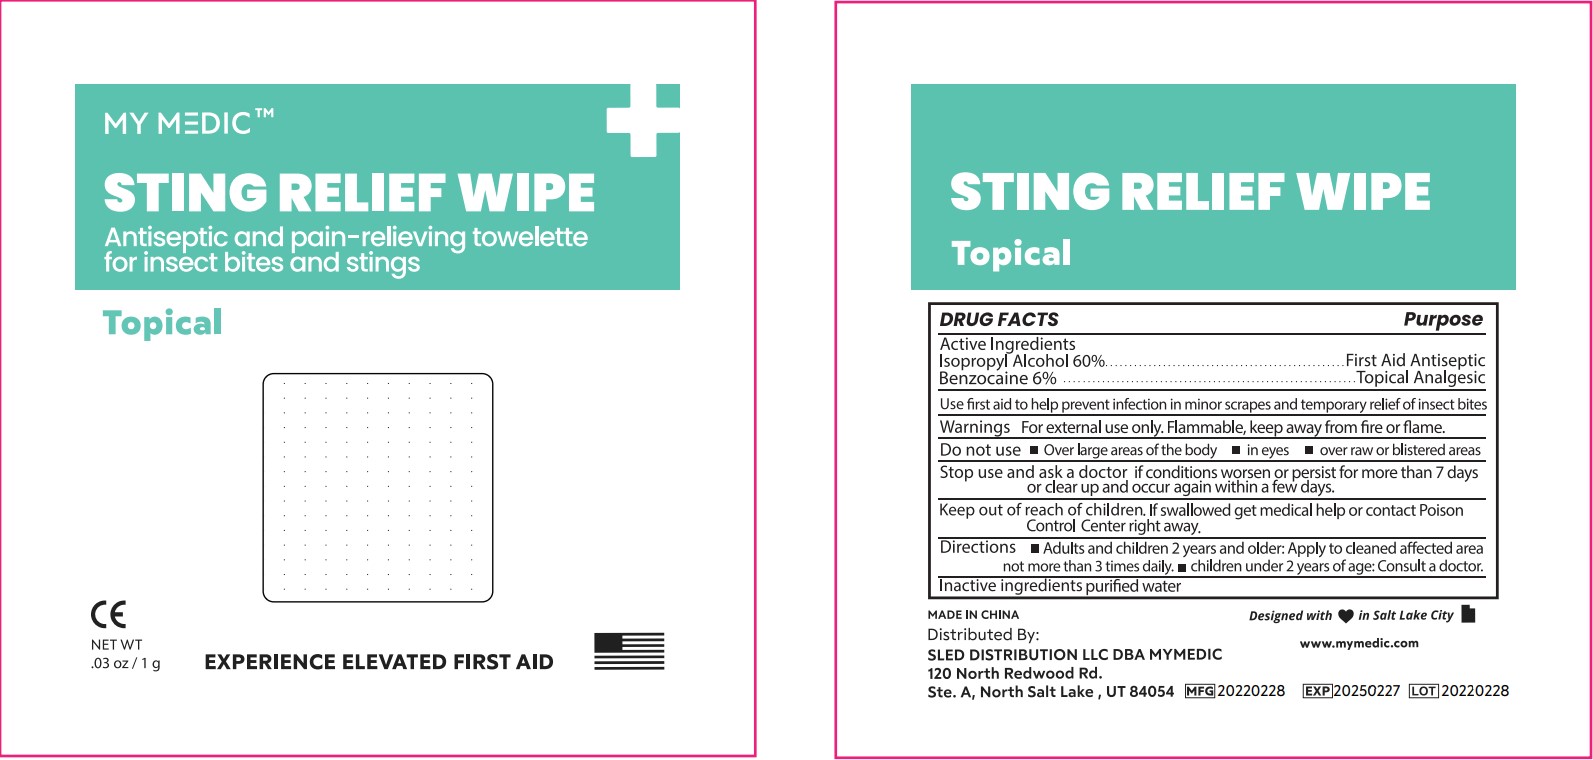 NDC: <a href=/NDC/53439-120-10>53439-120-10</a>
Cut Care
Insect Bite Antiseptic & Pain Relieving Wipes
First aid antiseptic
Topical Analgesic
Contents: 100 Pre-Moistened Wipes
